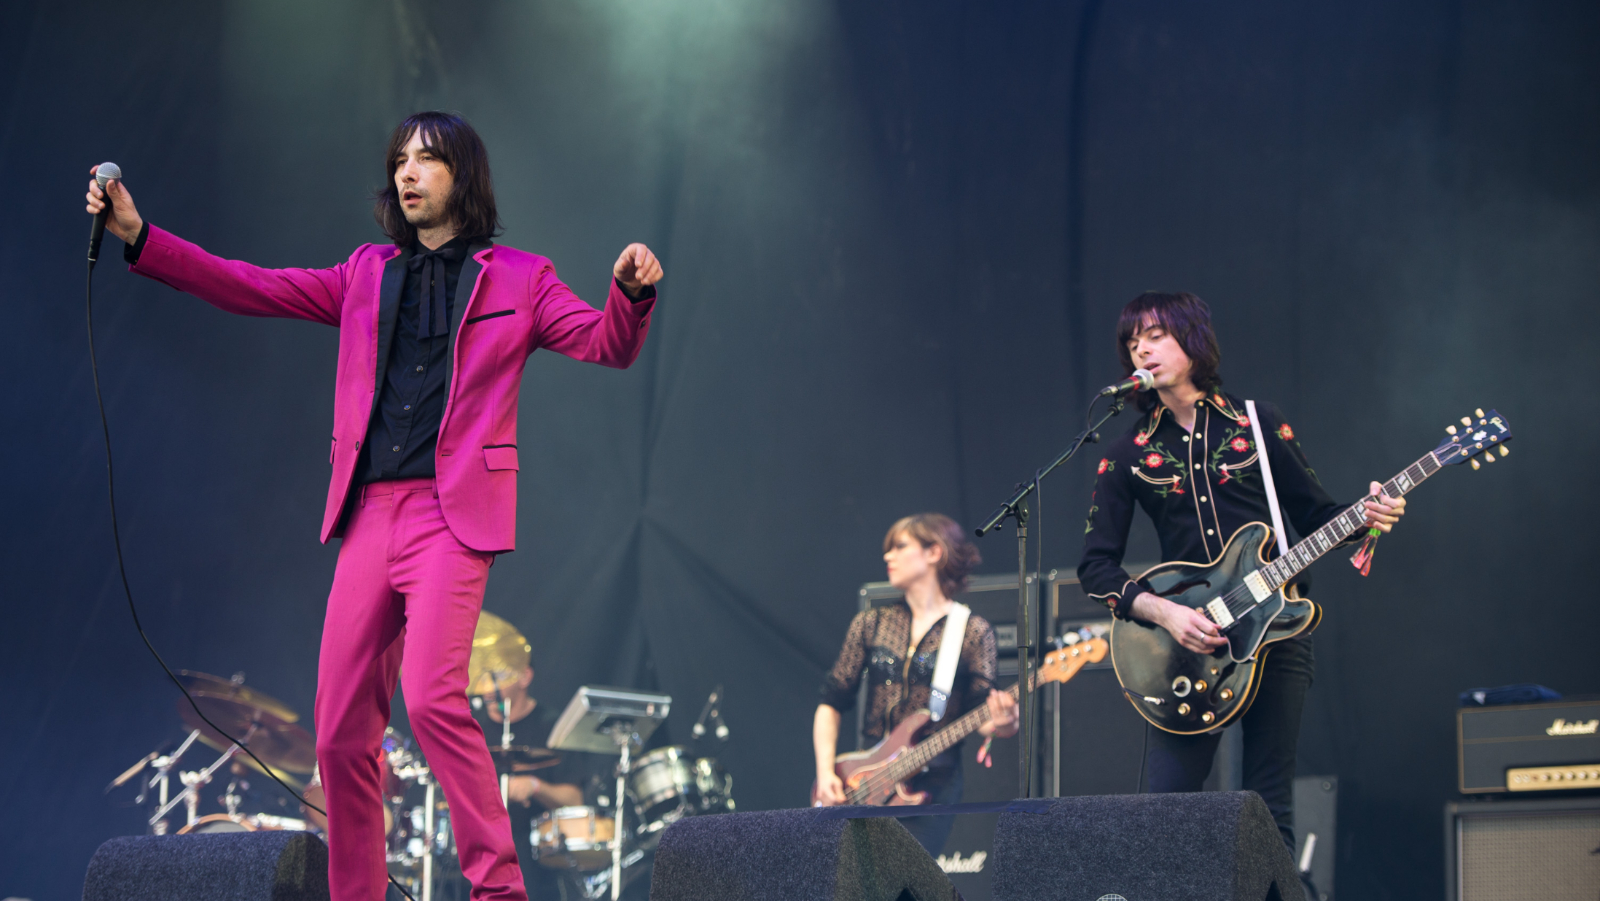 Primal Scream frontman Bobby Gillespie is the son of the late trade unionist Bob Gillespie. 